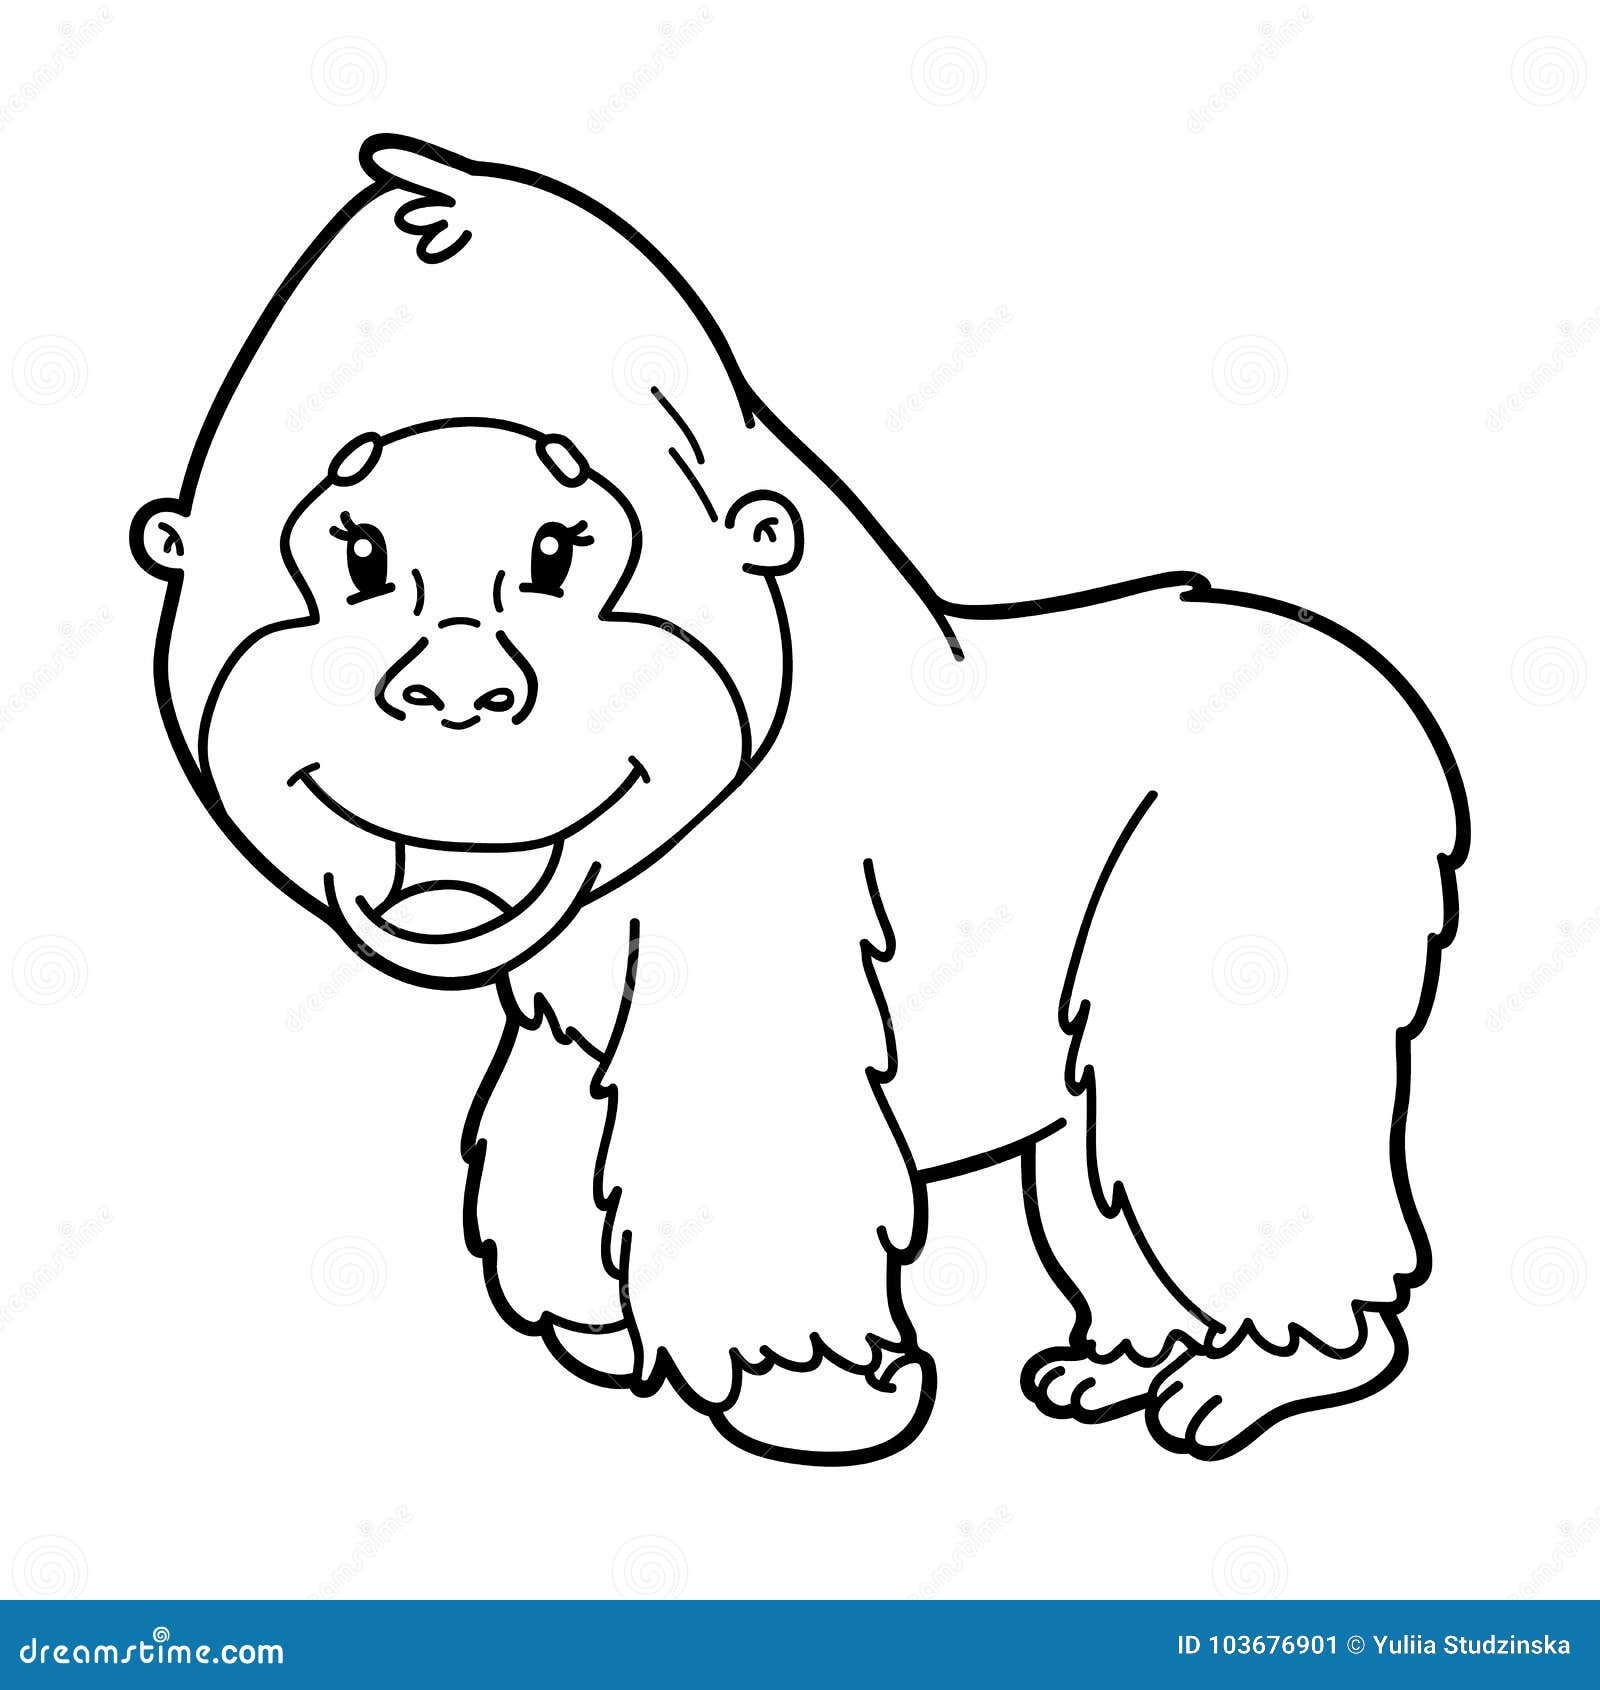 830 Top Cute Coloring Pages Of Gorillas Pictures